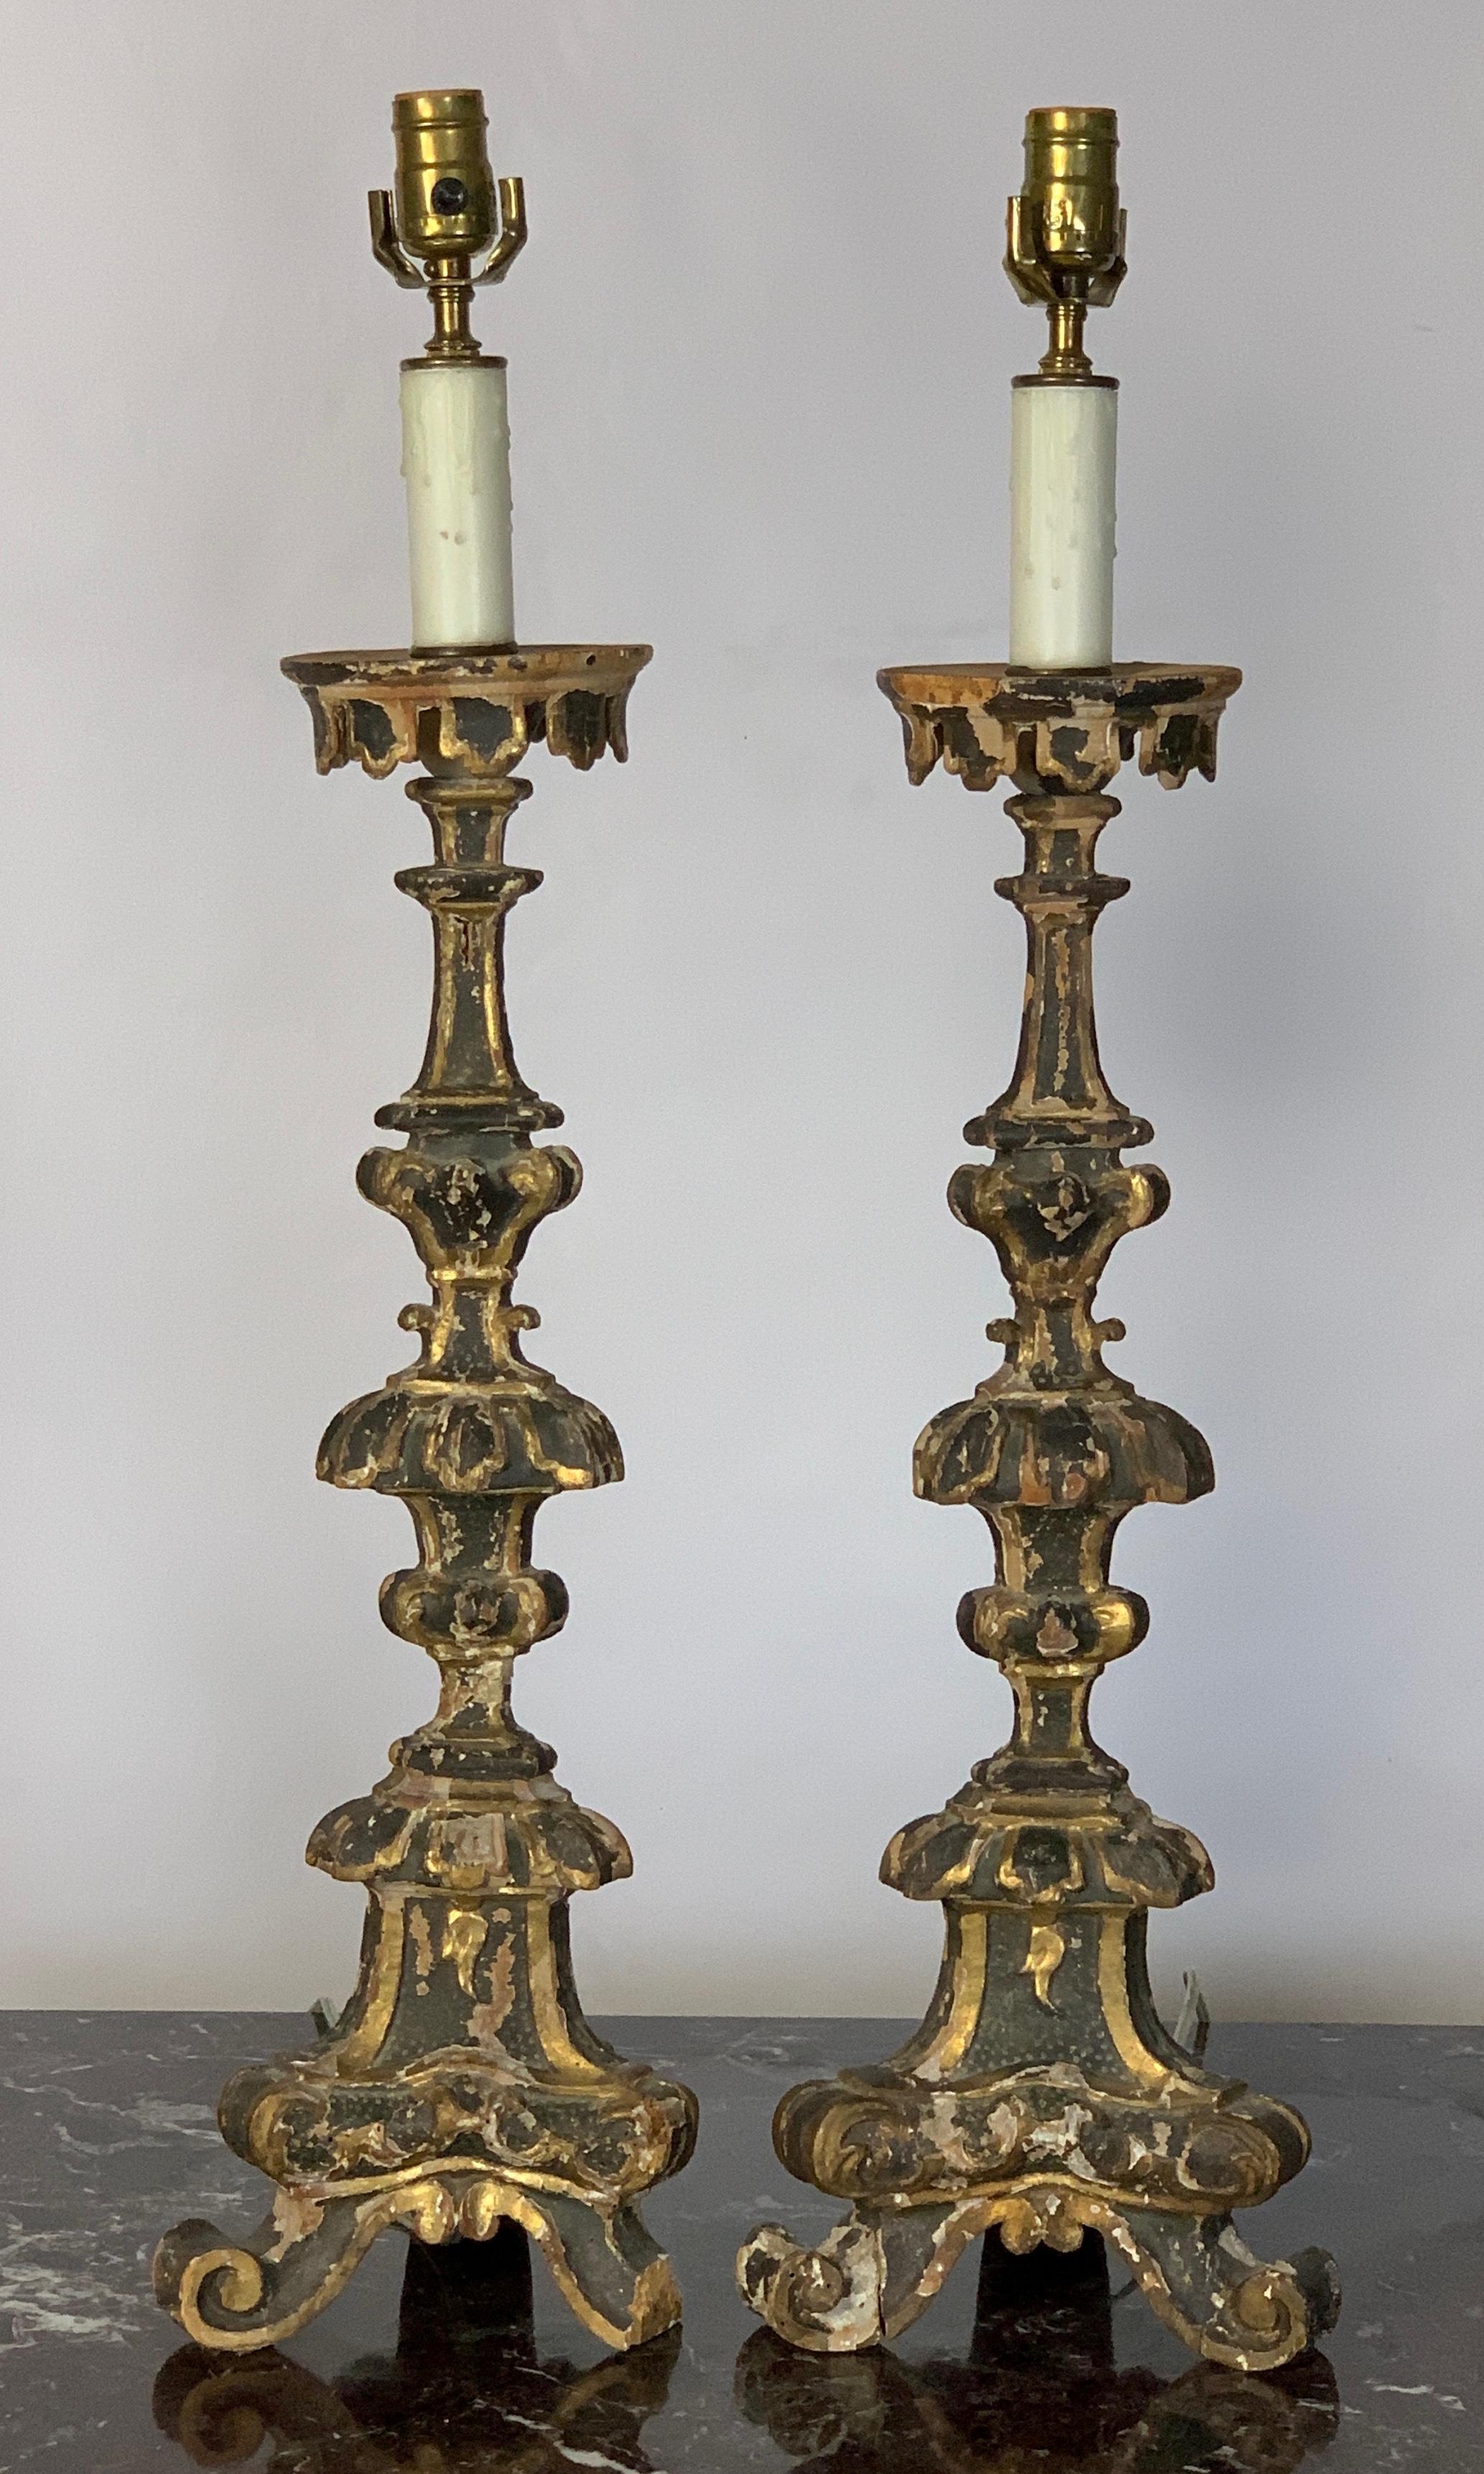 Baroque Pair of 18th Century Italian Pricket Candlestick Lamps